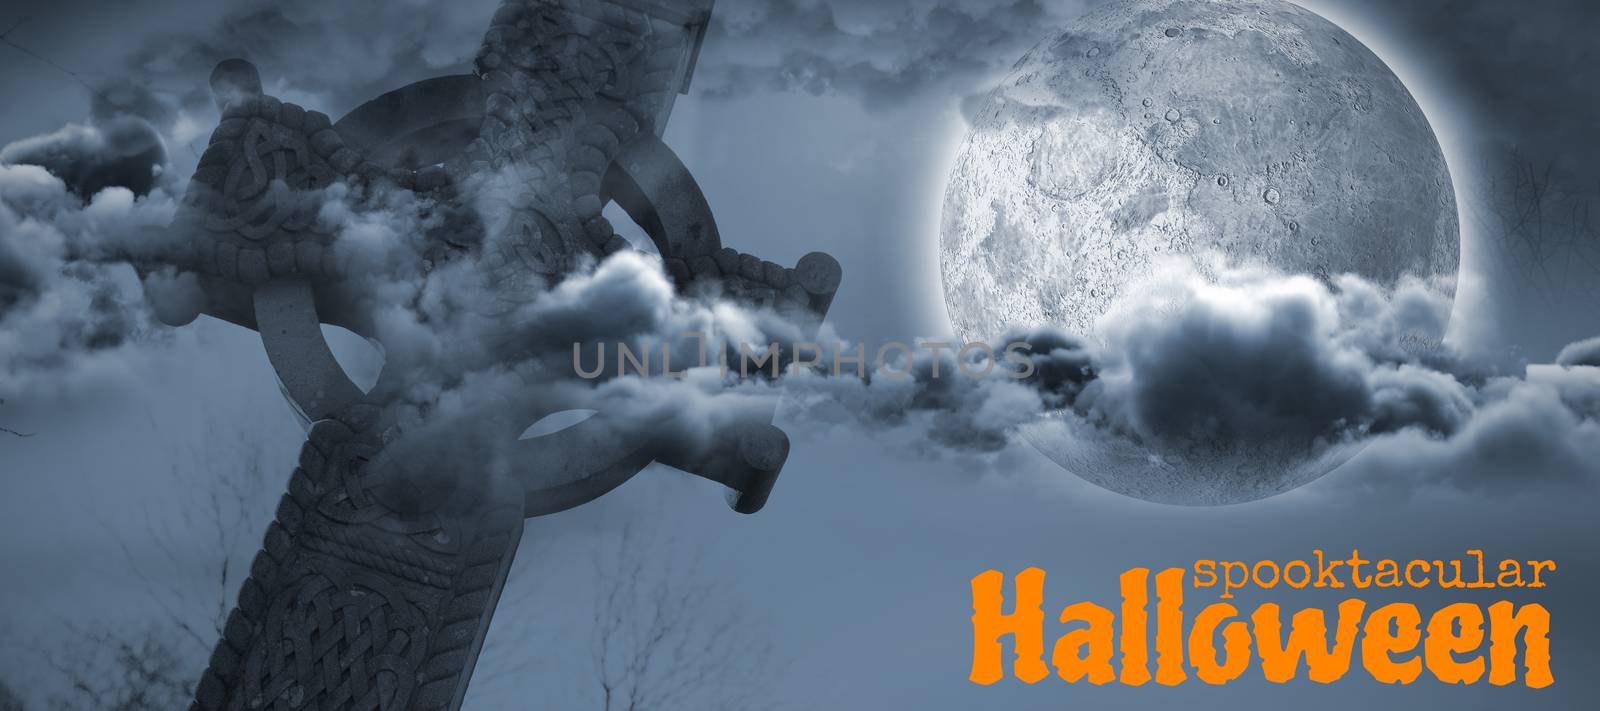 Graphic image of spooktacular Halloween text against celtic cross in front of moon behind clouds 